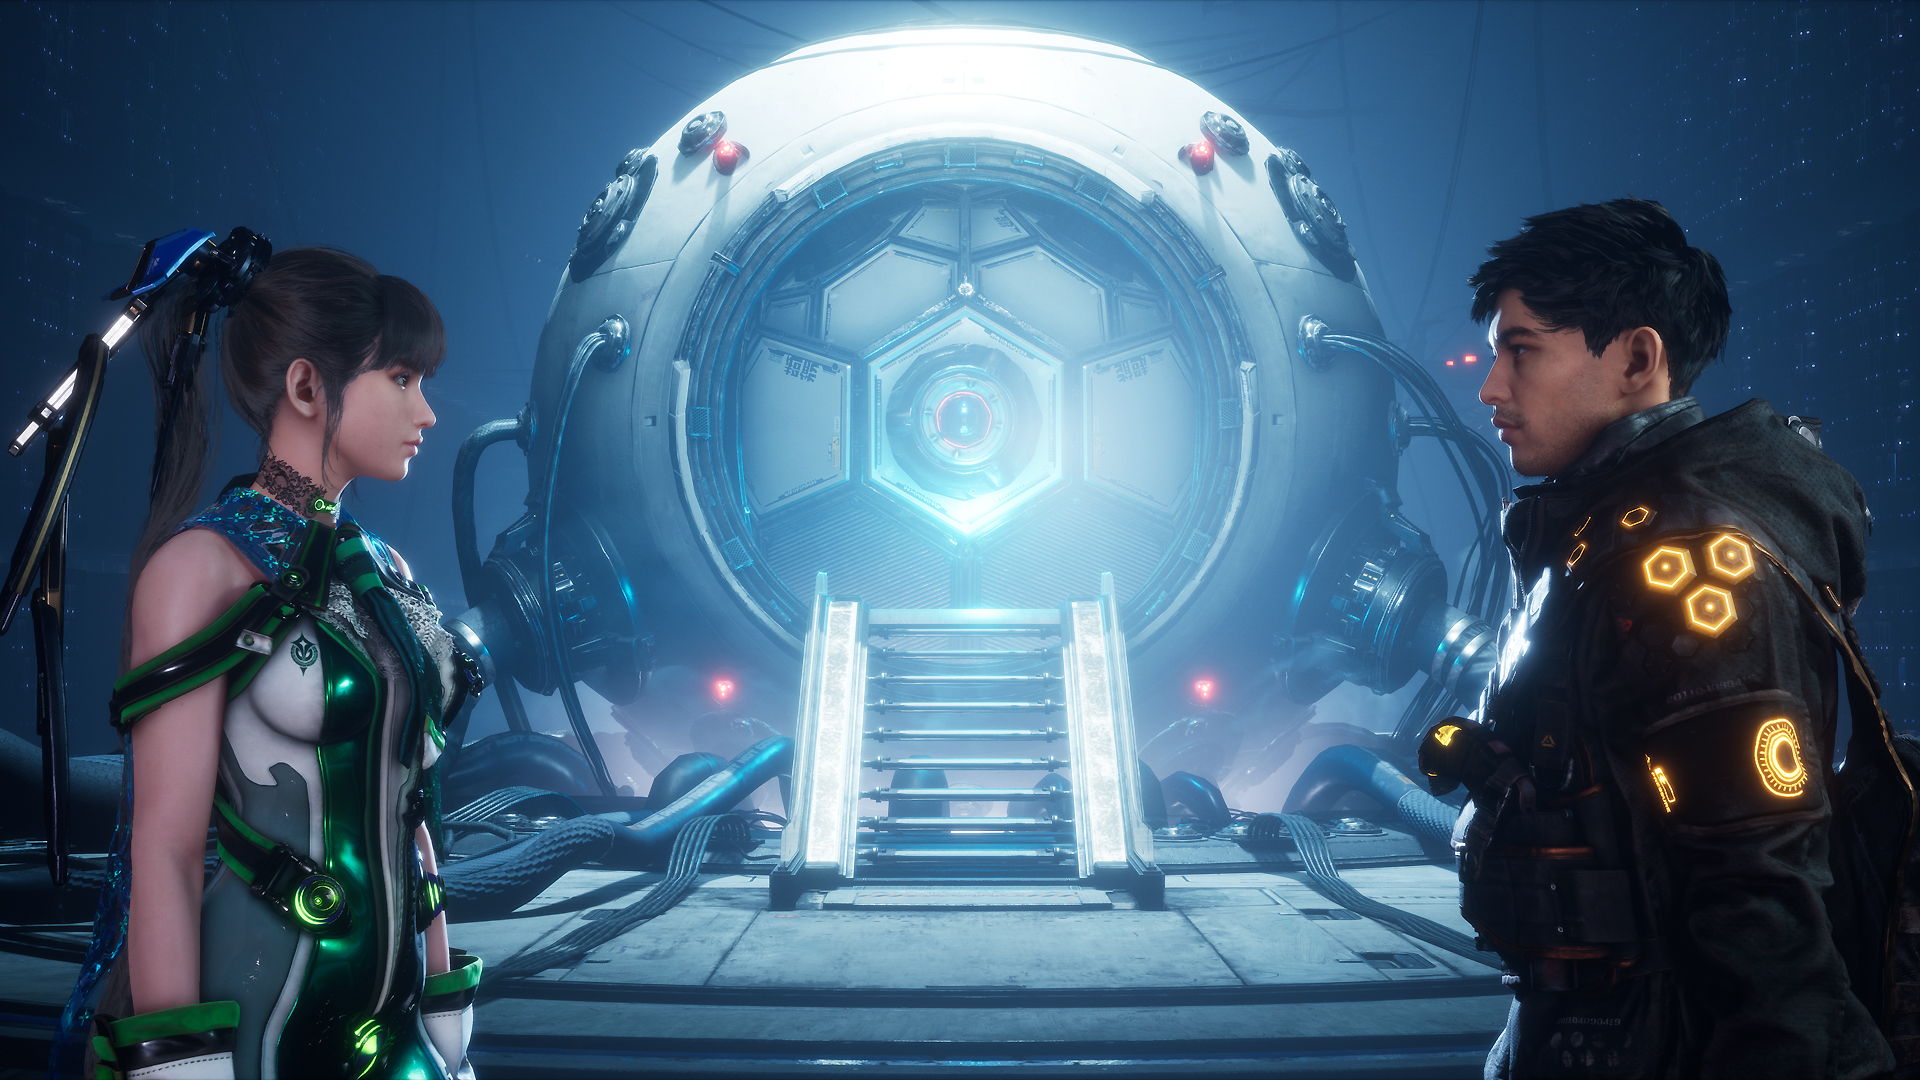 Eve and her companion face each other, in the background a set of stairs leads up to a futuristic looking chamber whose door is glowing blue.